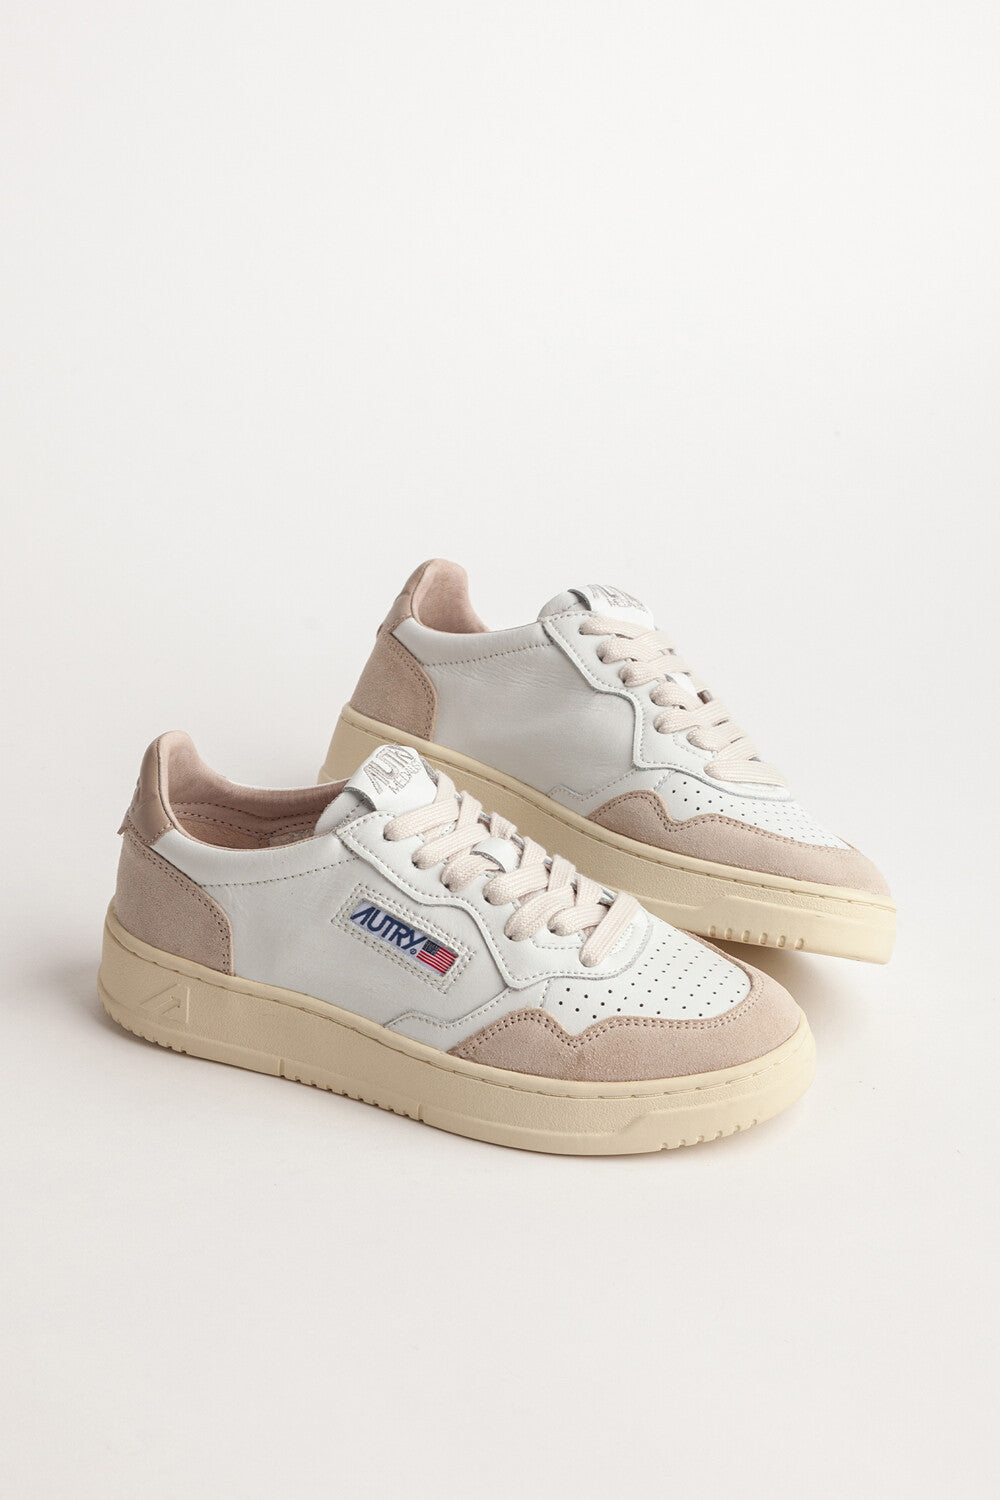 AUTRY 01 Low / Suede White Pepper